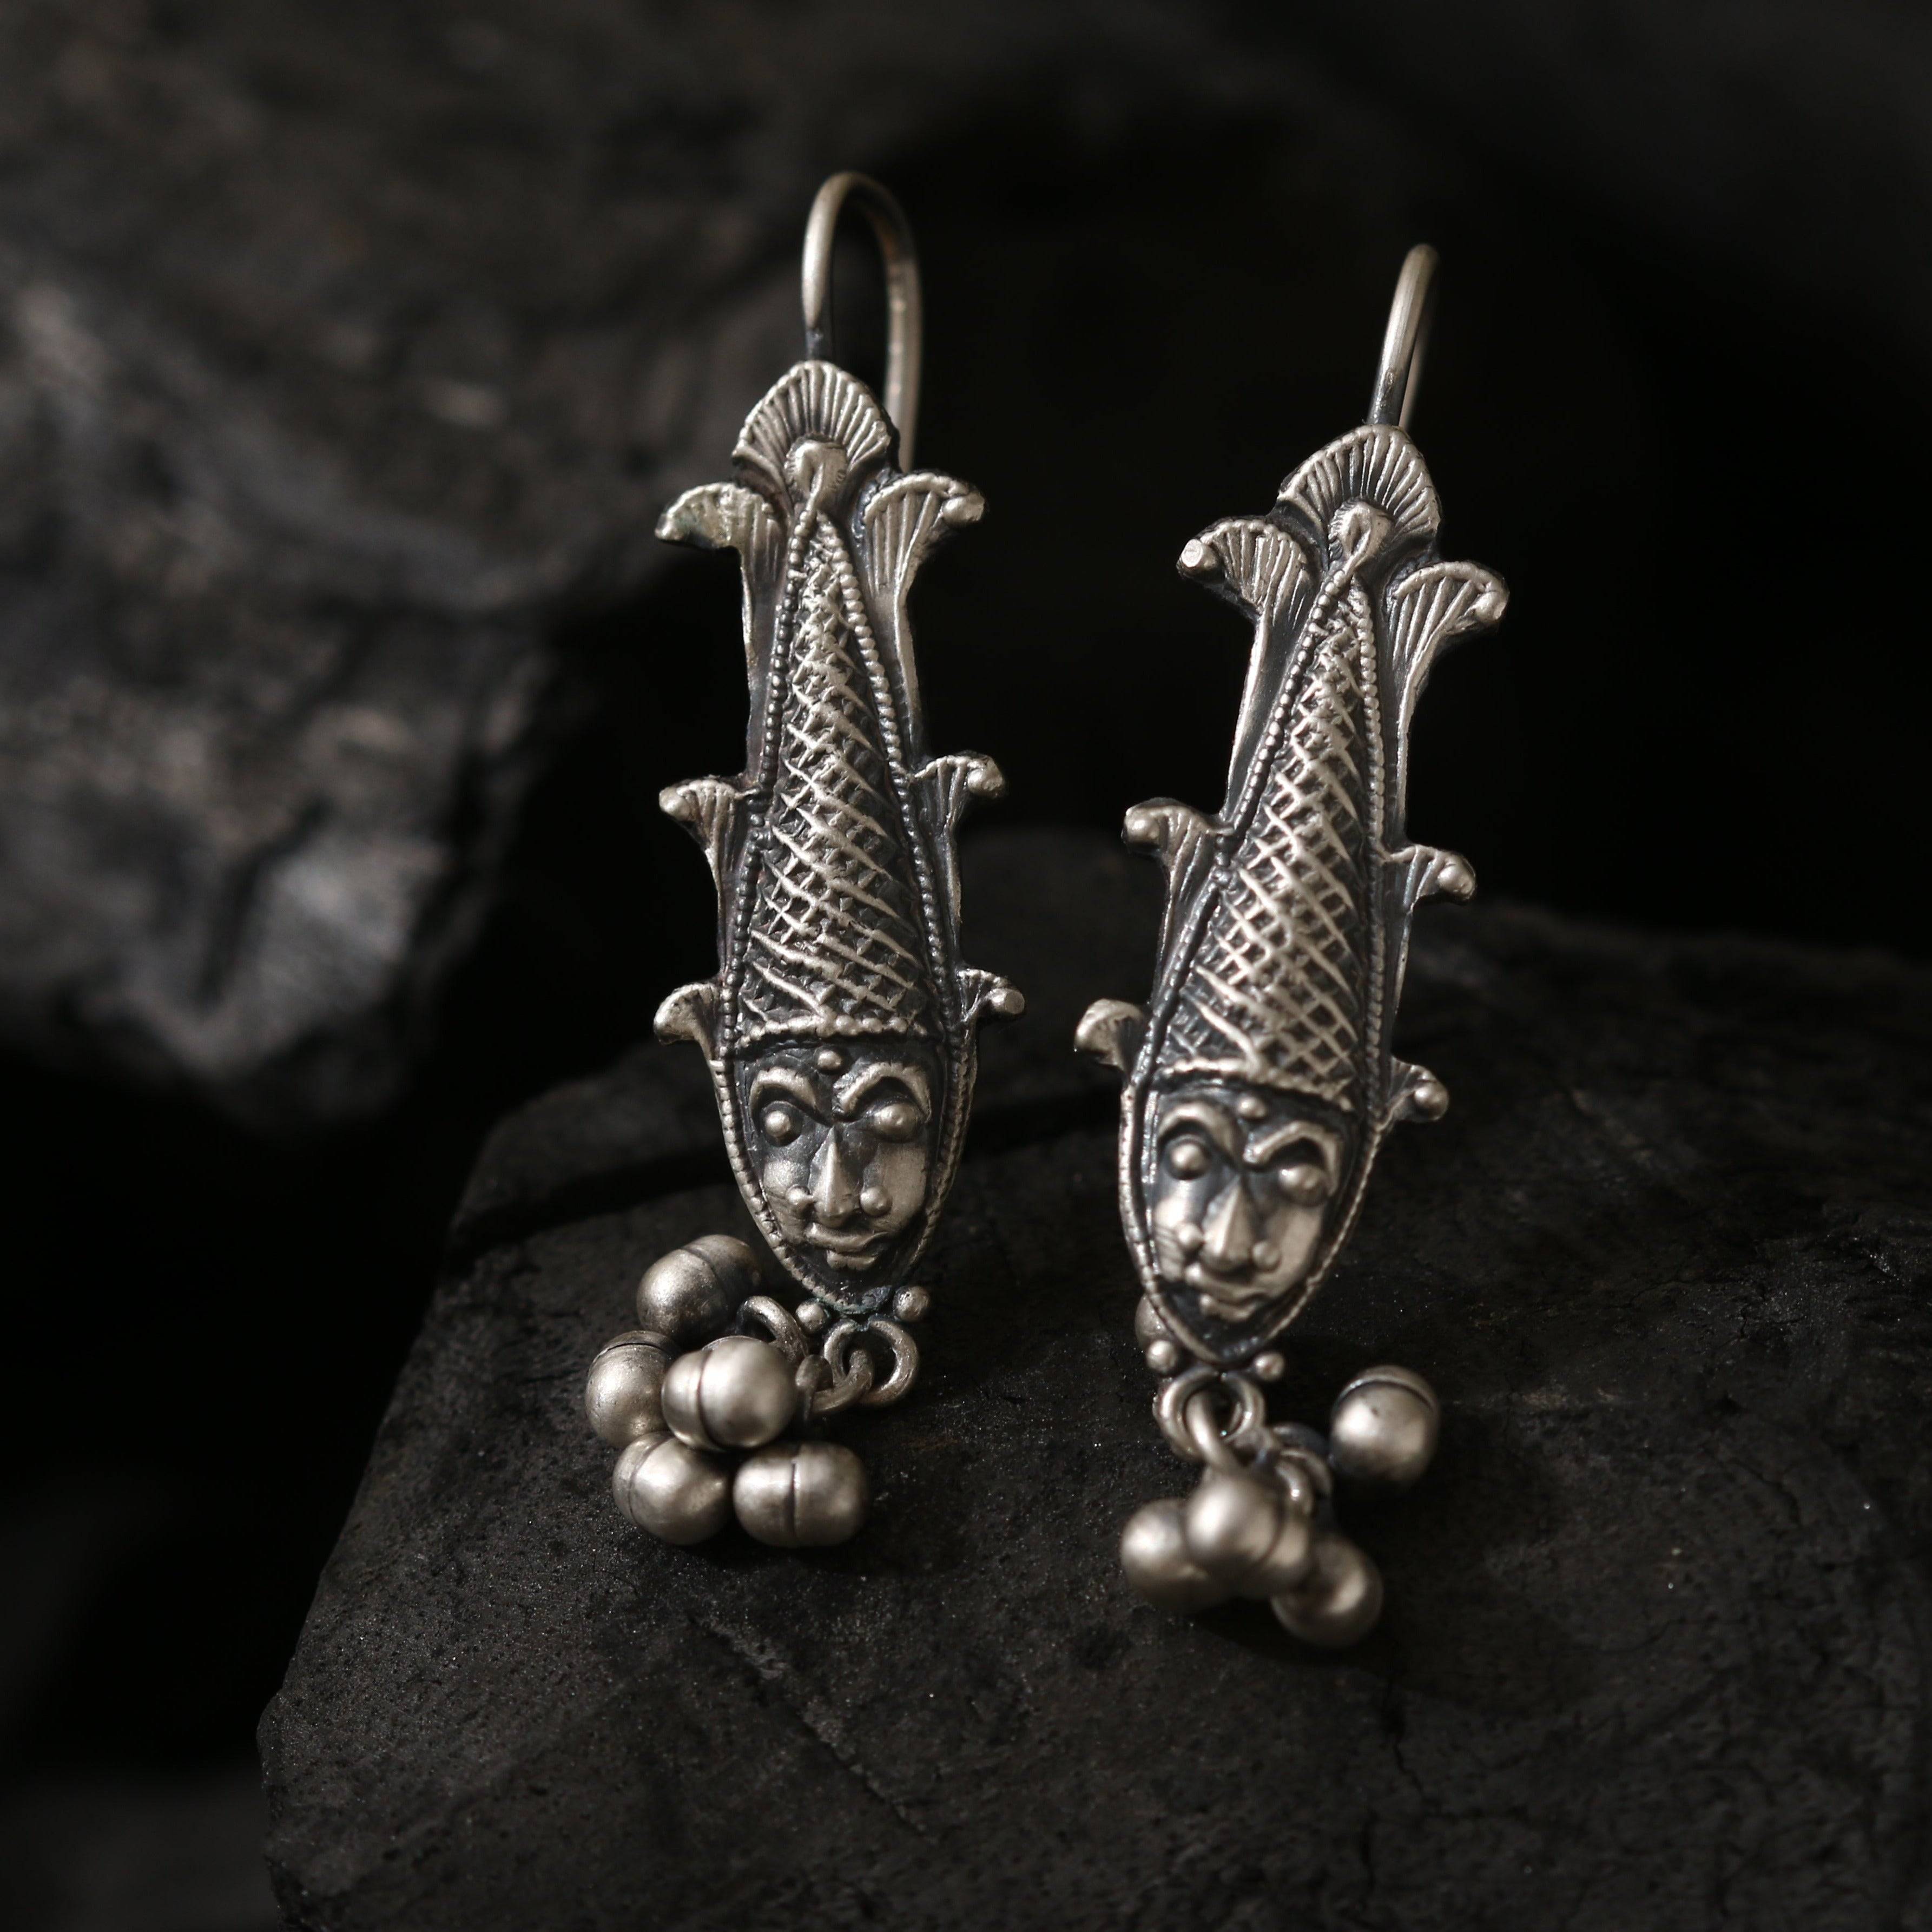 a pair of silver earrings with a face on them